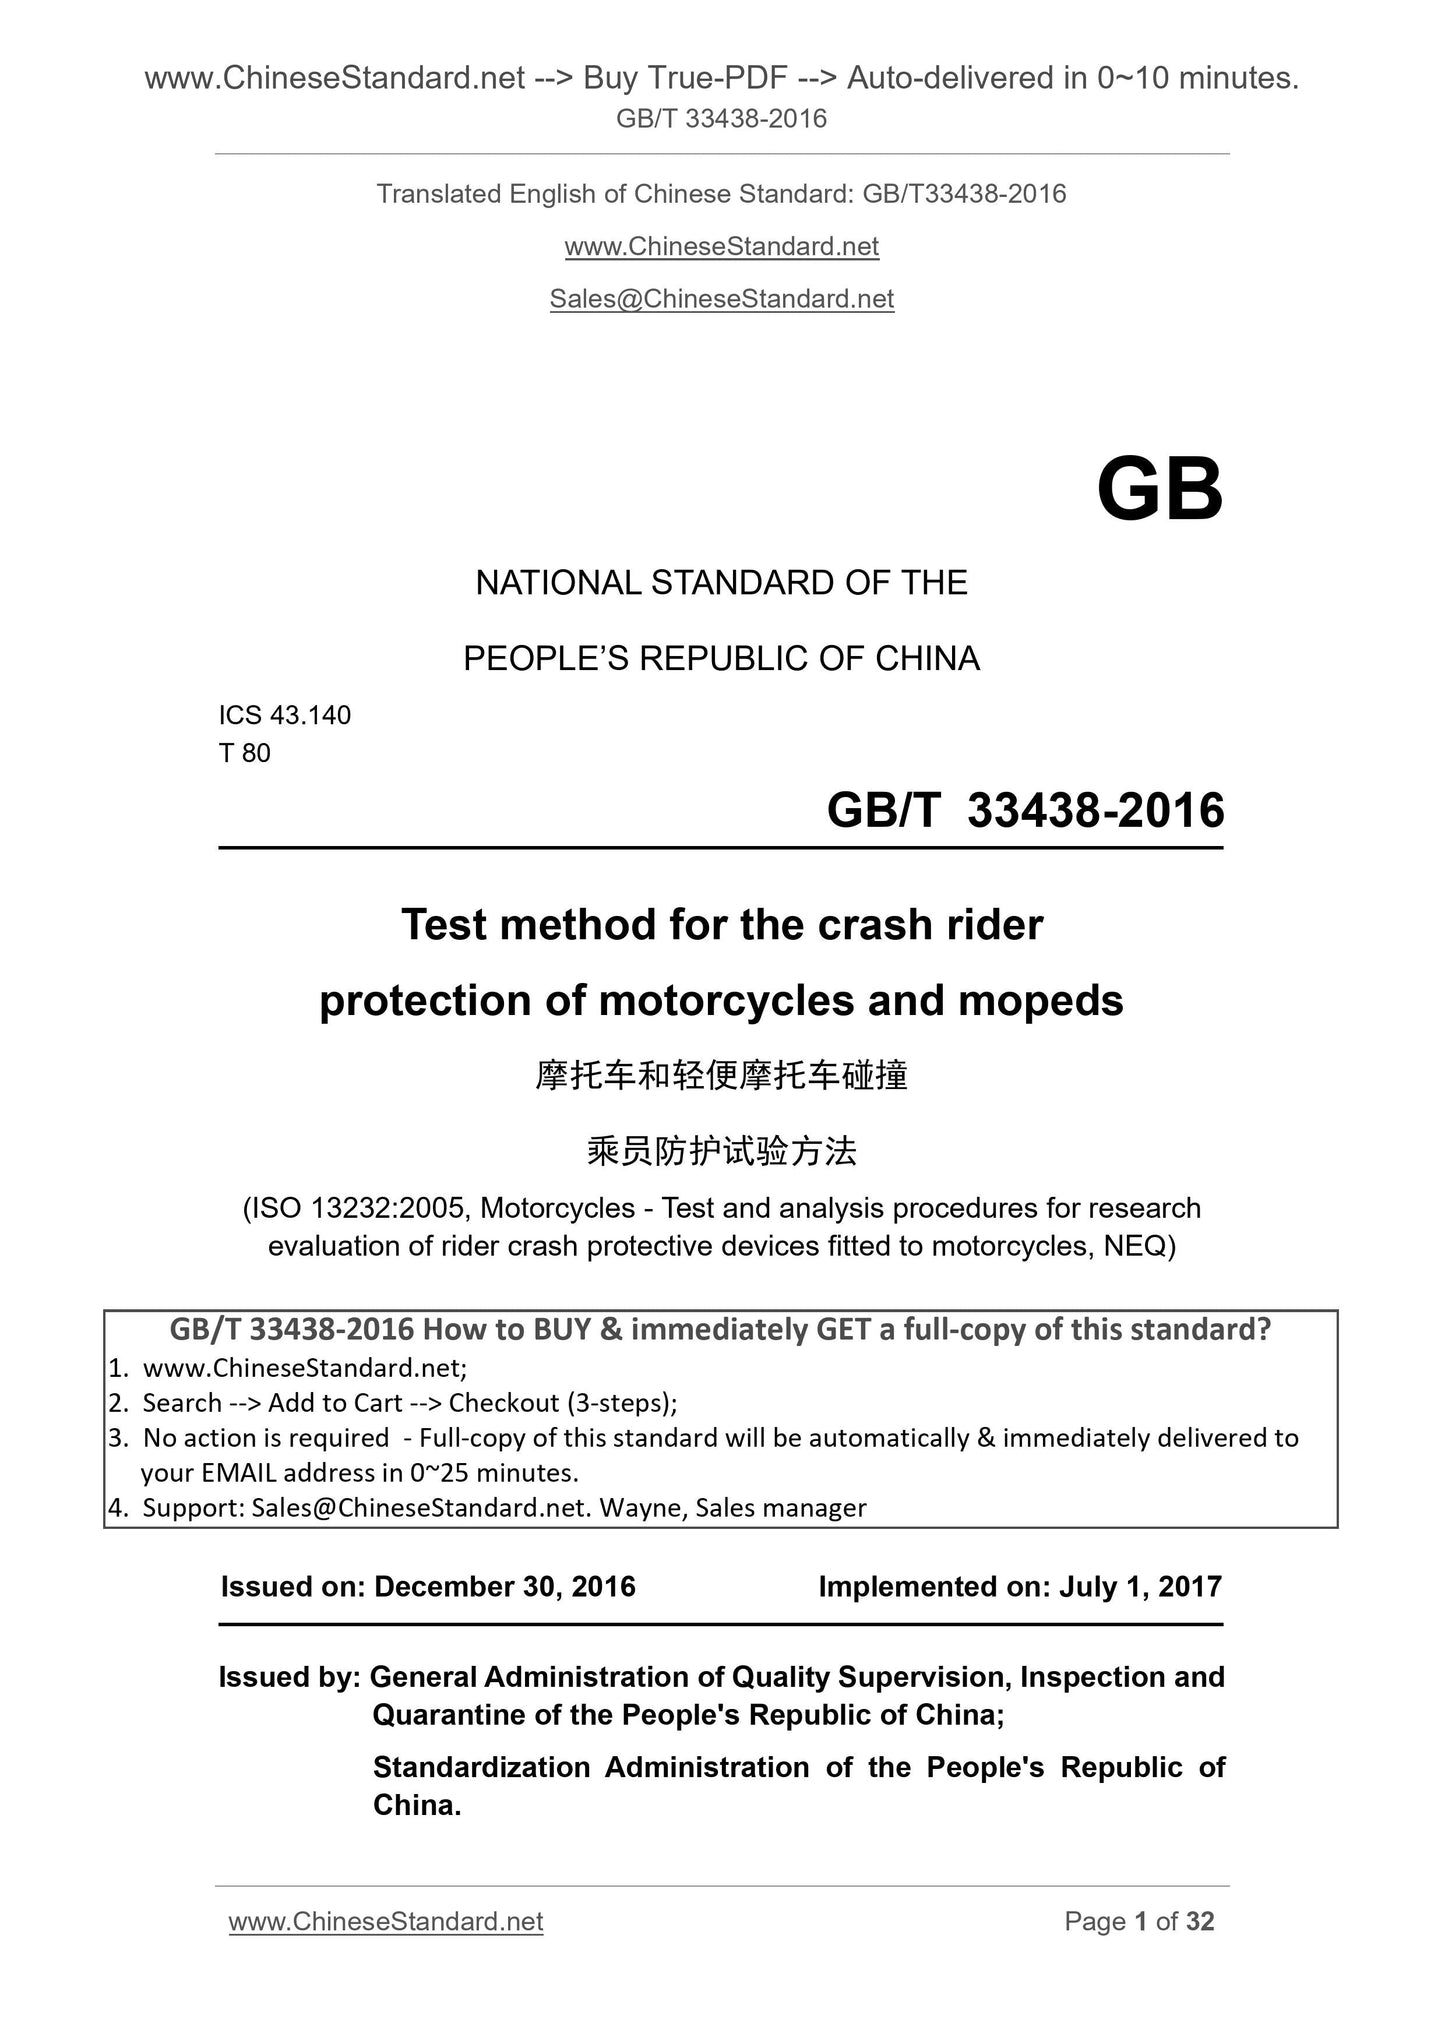 GB/T 33438-2016 Page 1